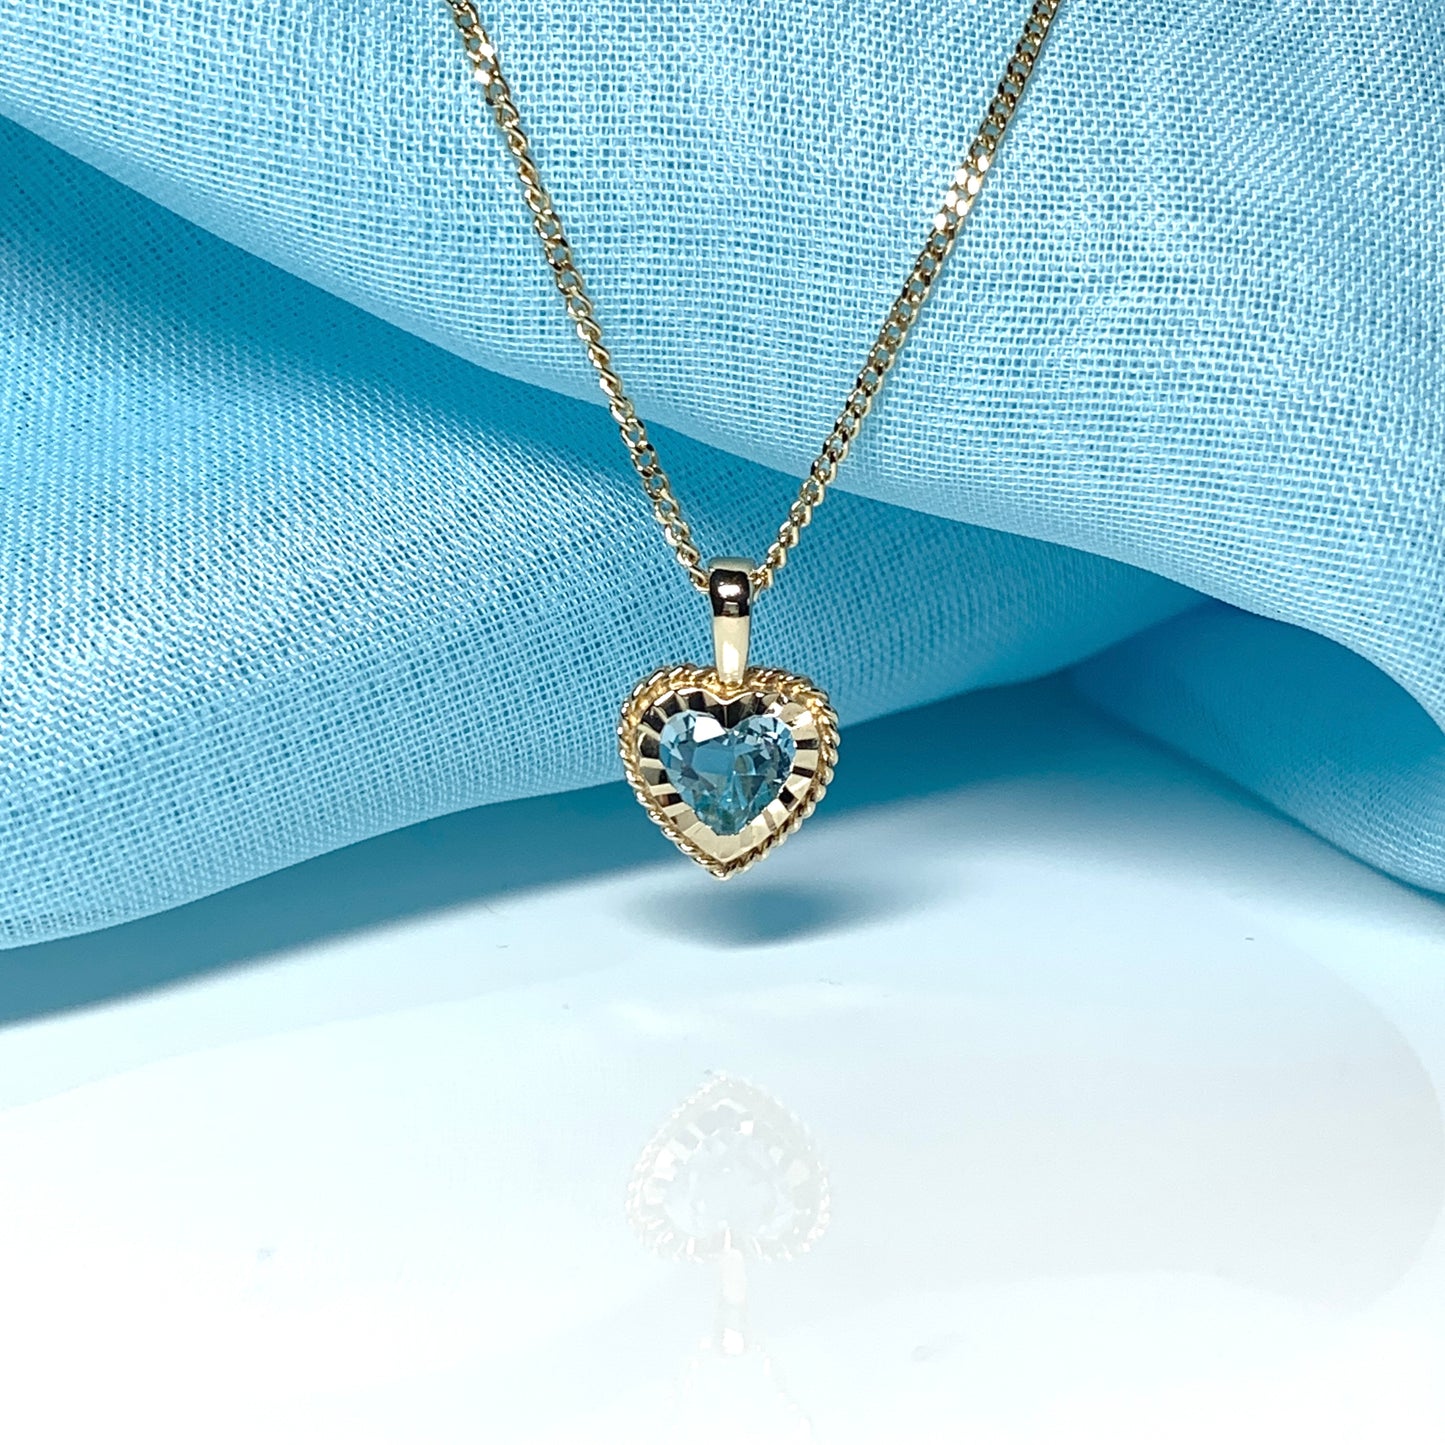 Blue Topaz necklace yellow gold heart shaped pendant